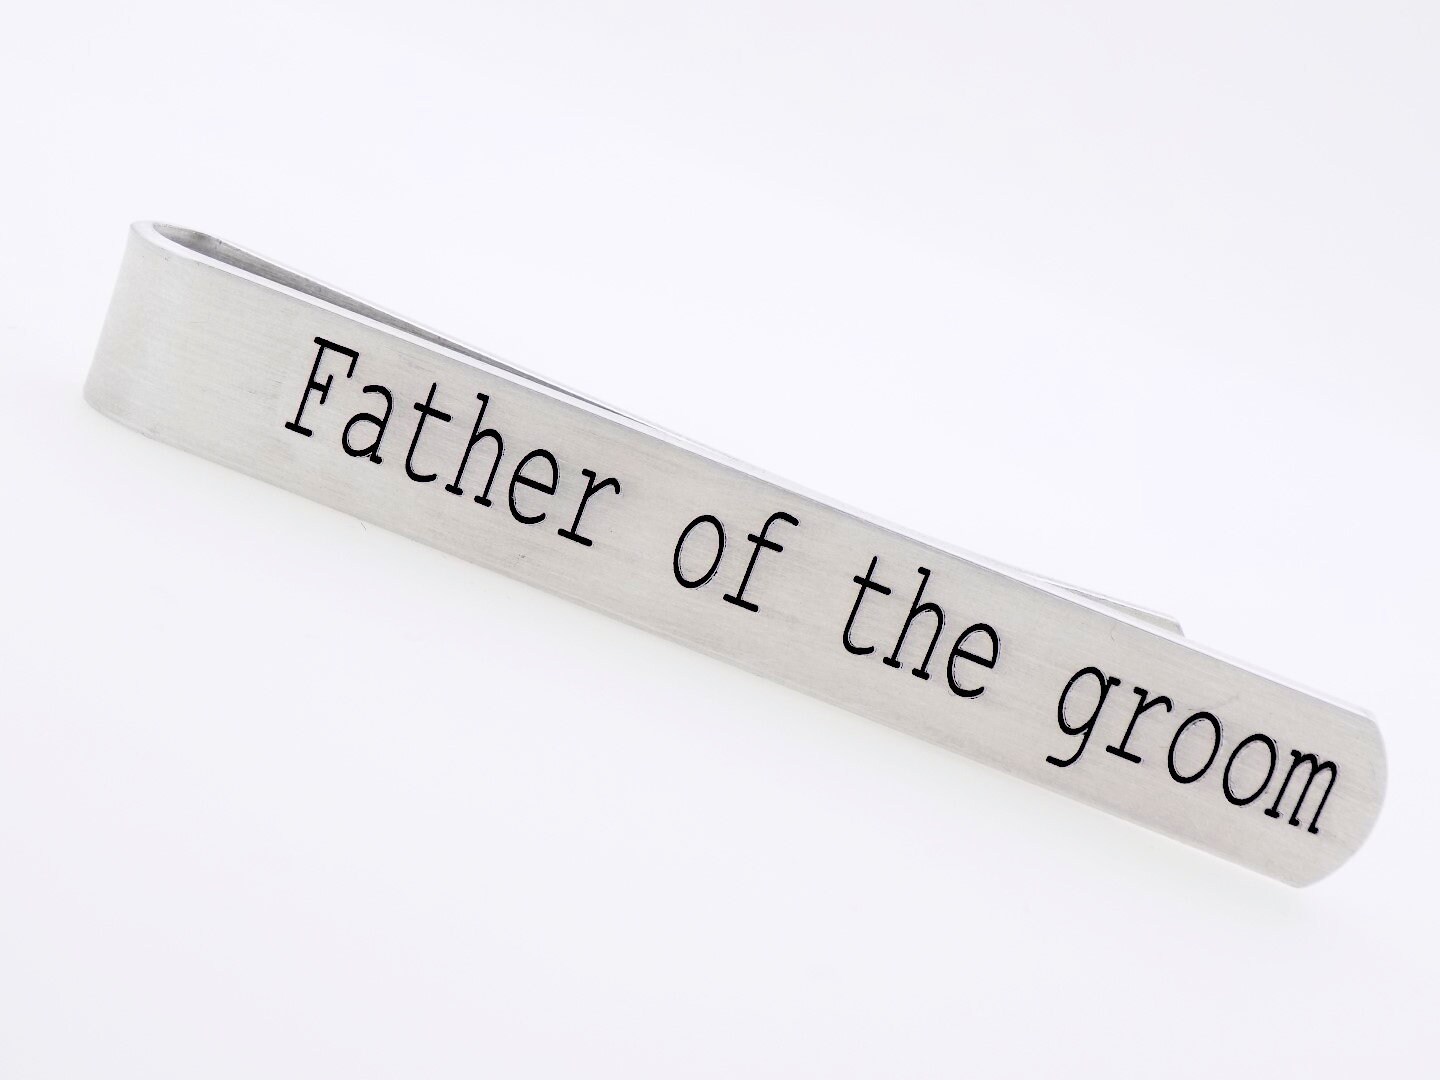 Wedding tie bar father of the groom father of the bride | Etsy